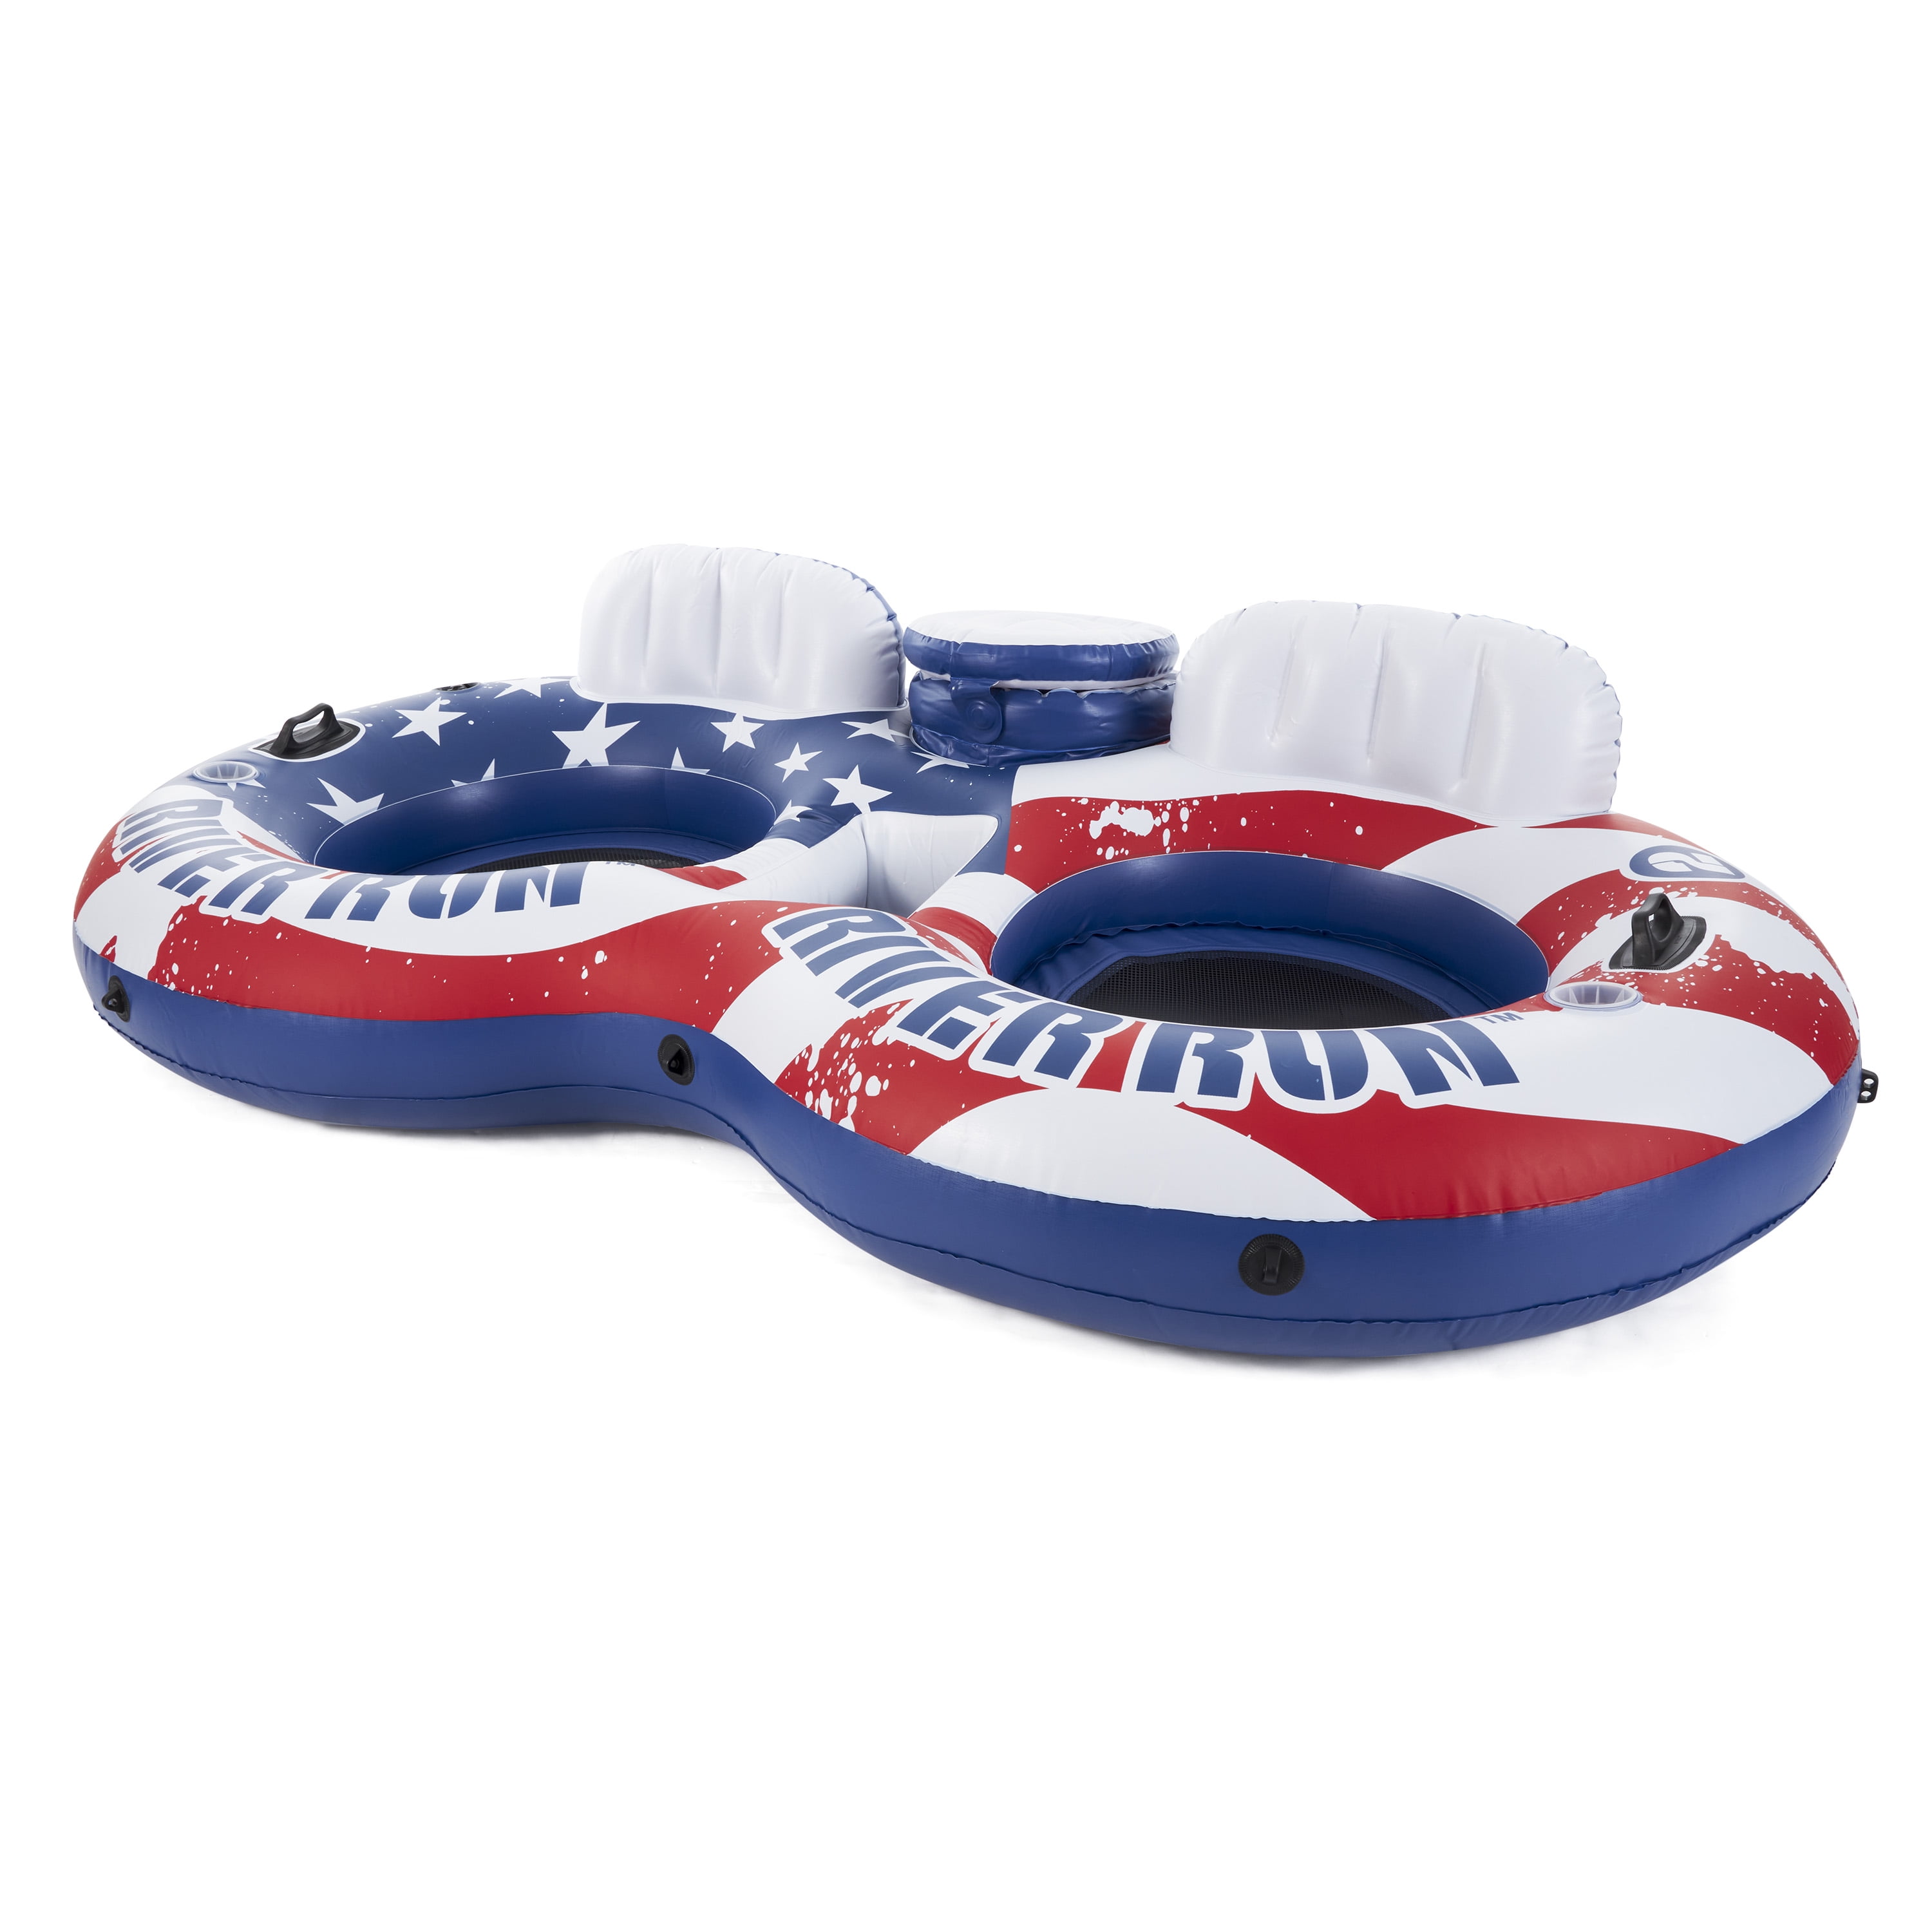 Intex American Flag Inflatable 2 Person Pool Tube Float with Cooler (Used)